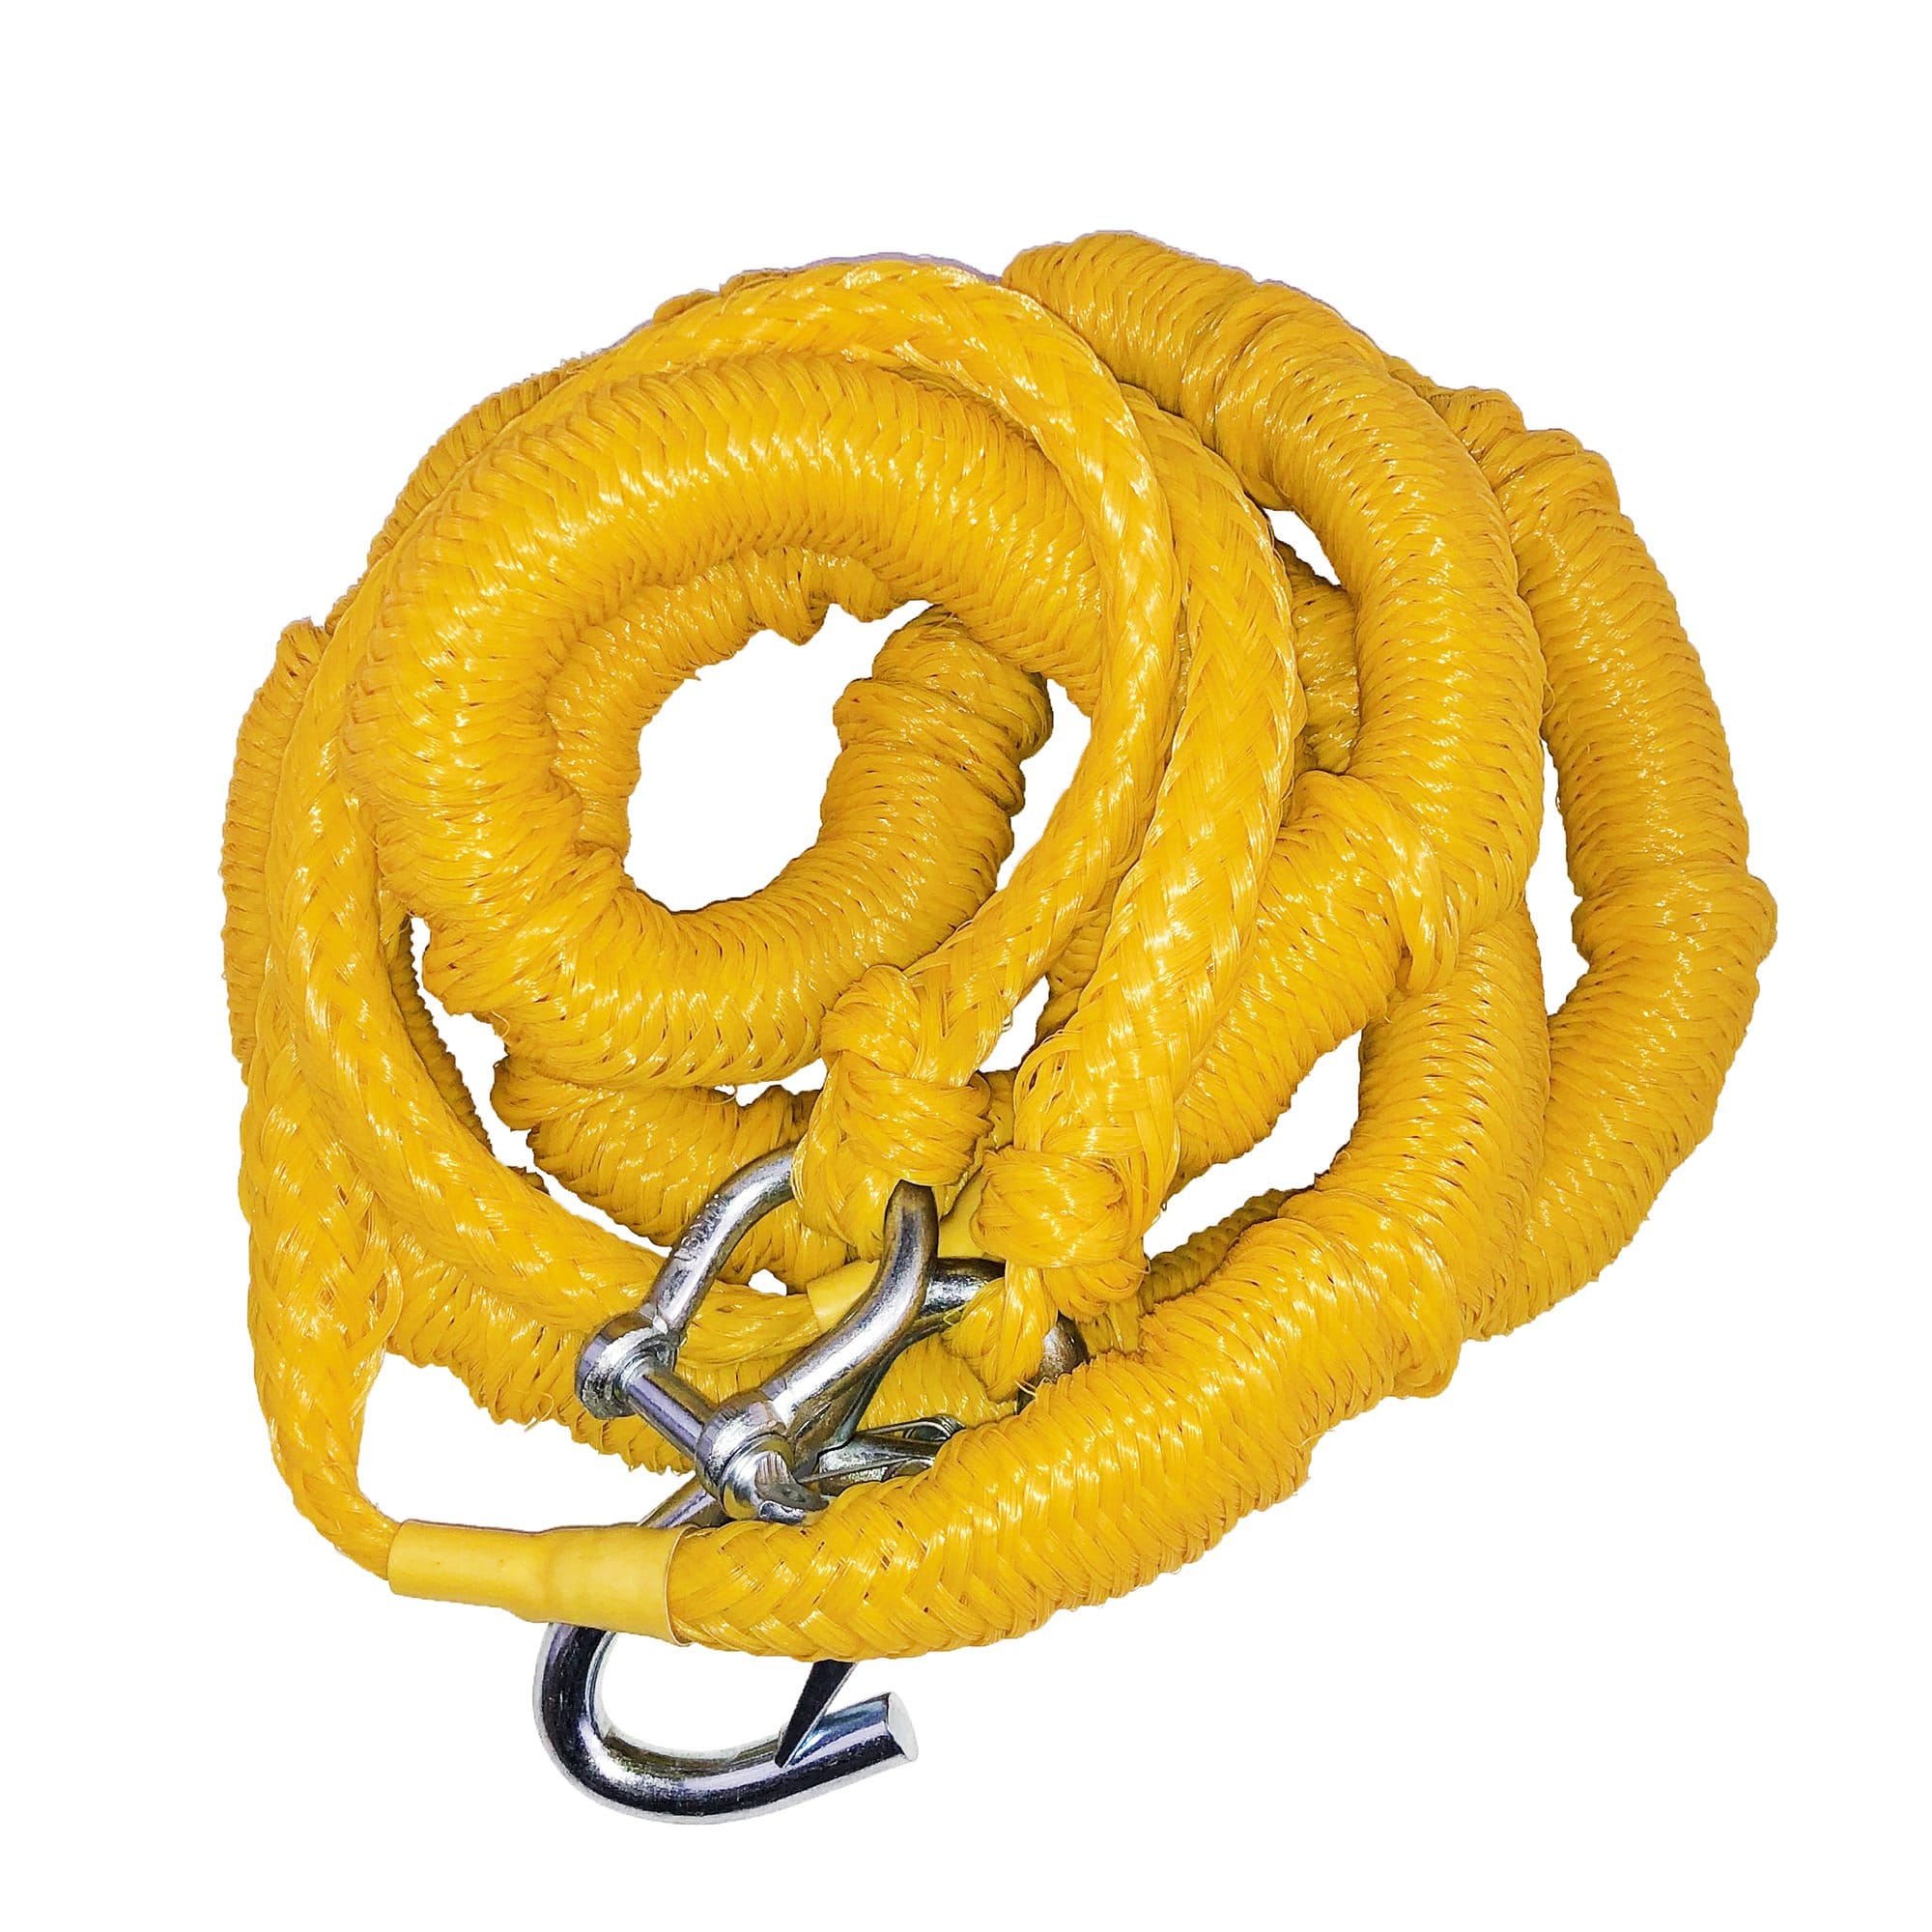 Greenfield SWAB-Y - Shallow Water Anchor Bungee Cord Ab's - 1/2 Size - Yellow